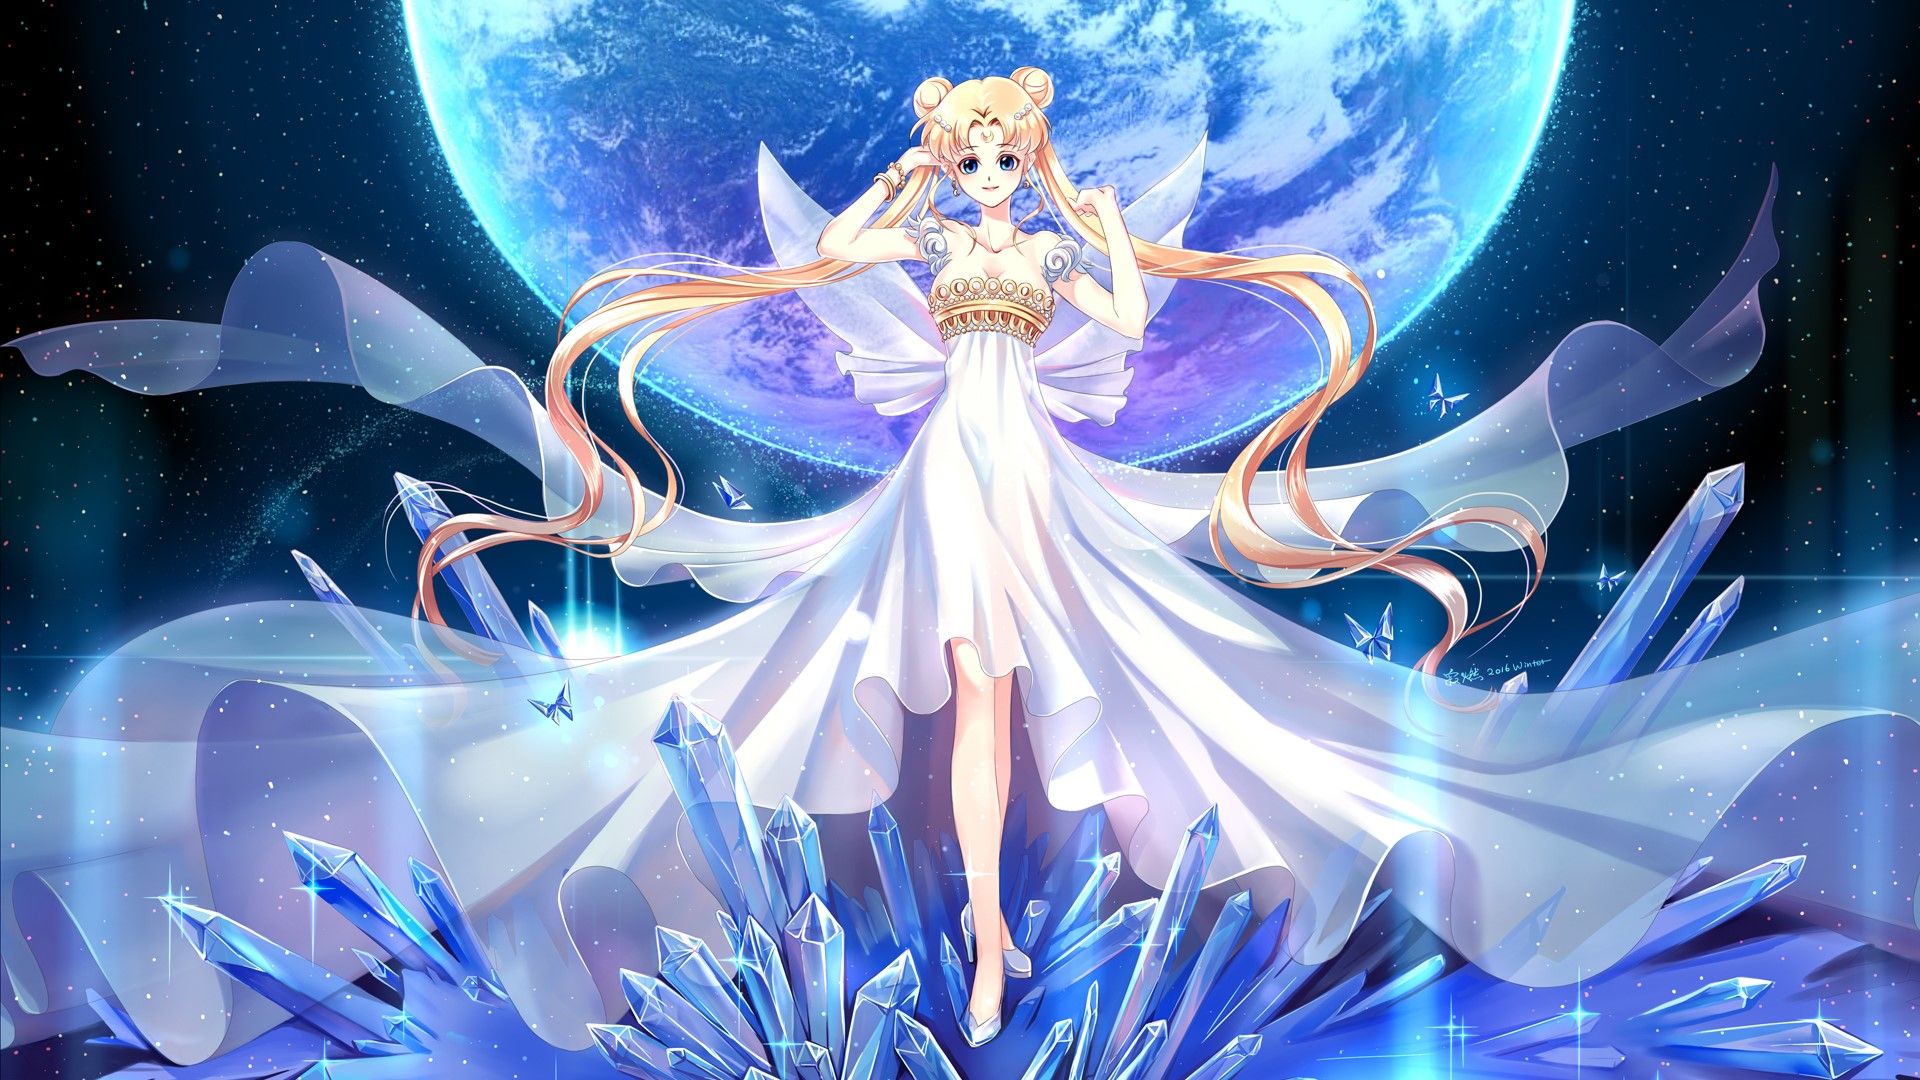 Princess Serenity, a character from the Sailor Moon series, standing in front of the full moon - Sailor Moon